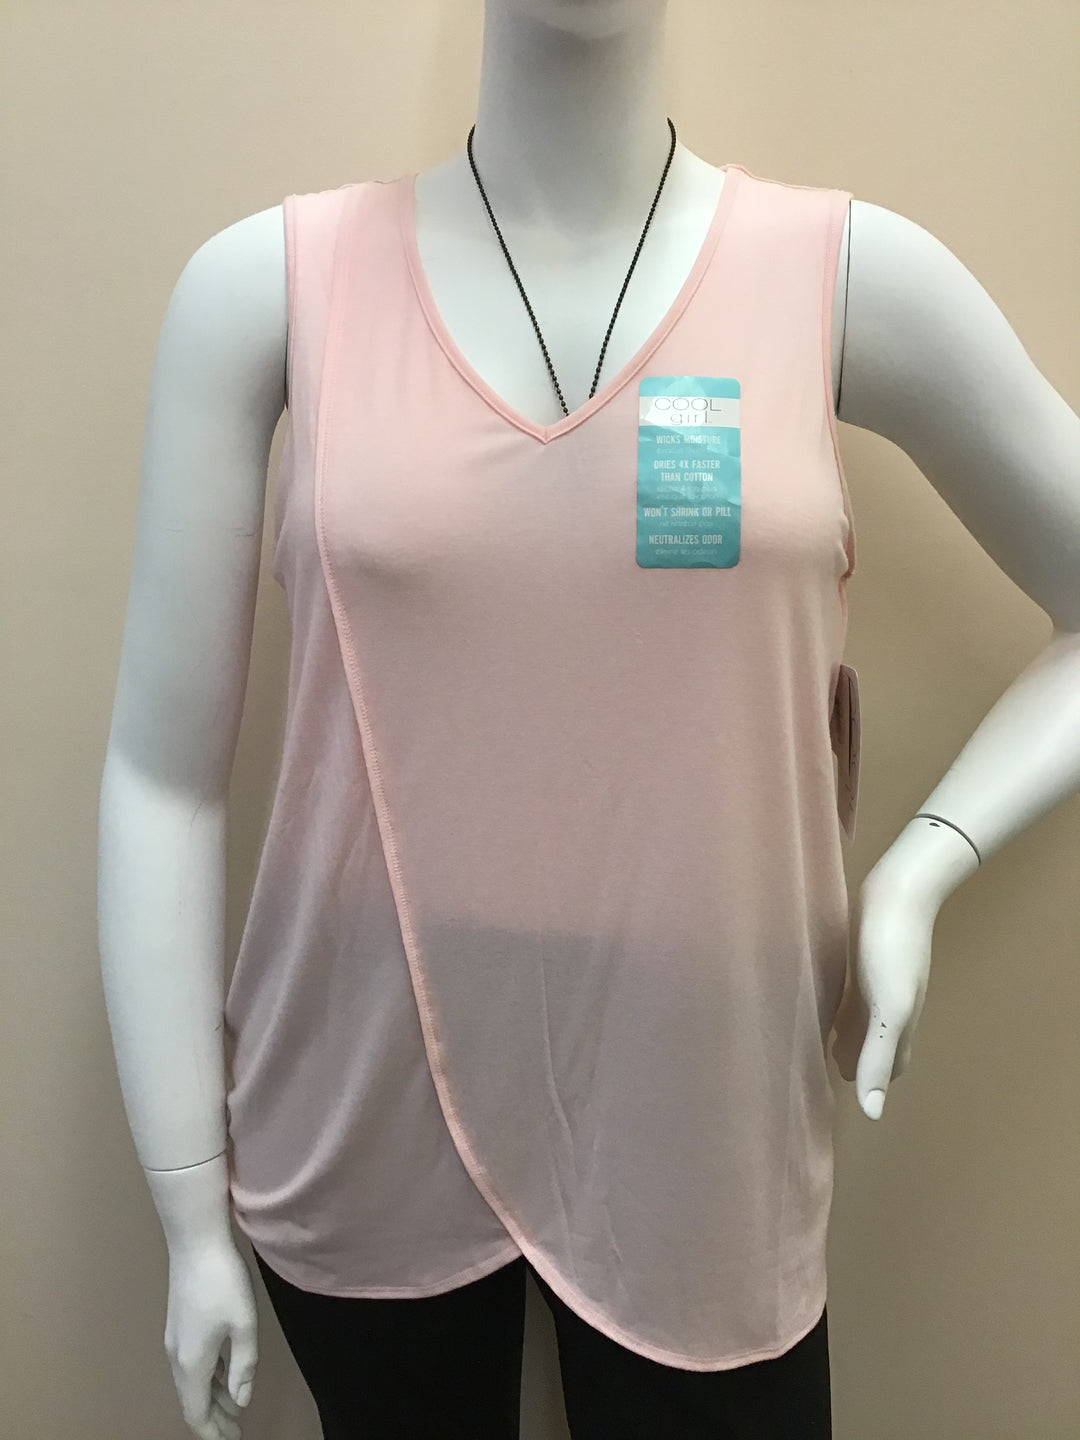 Cool Girl Sleeveless Top - Size Large